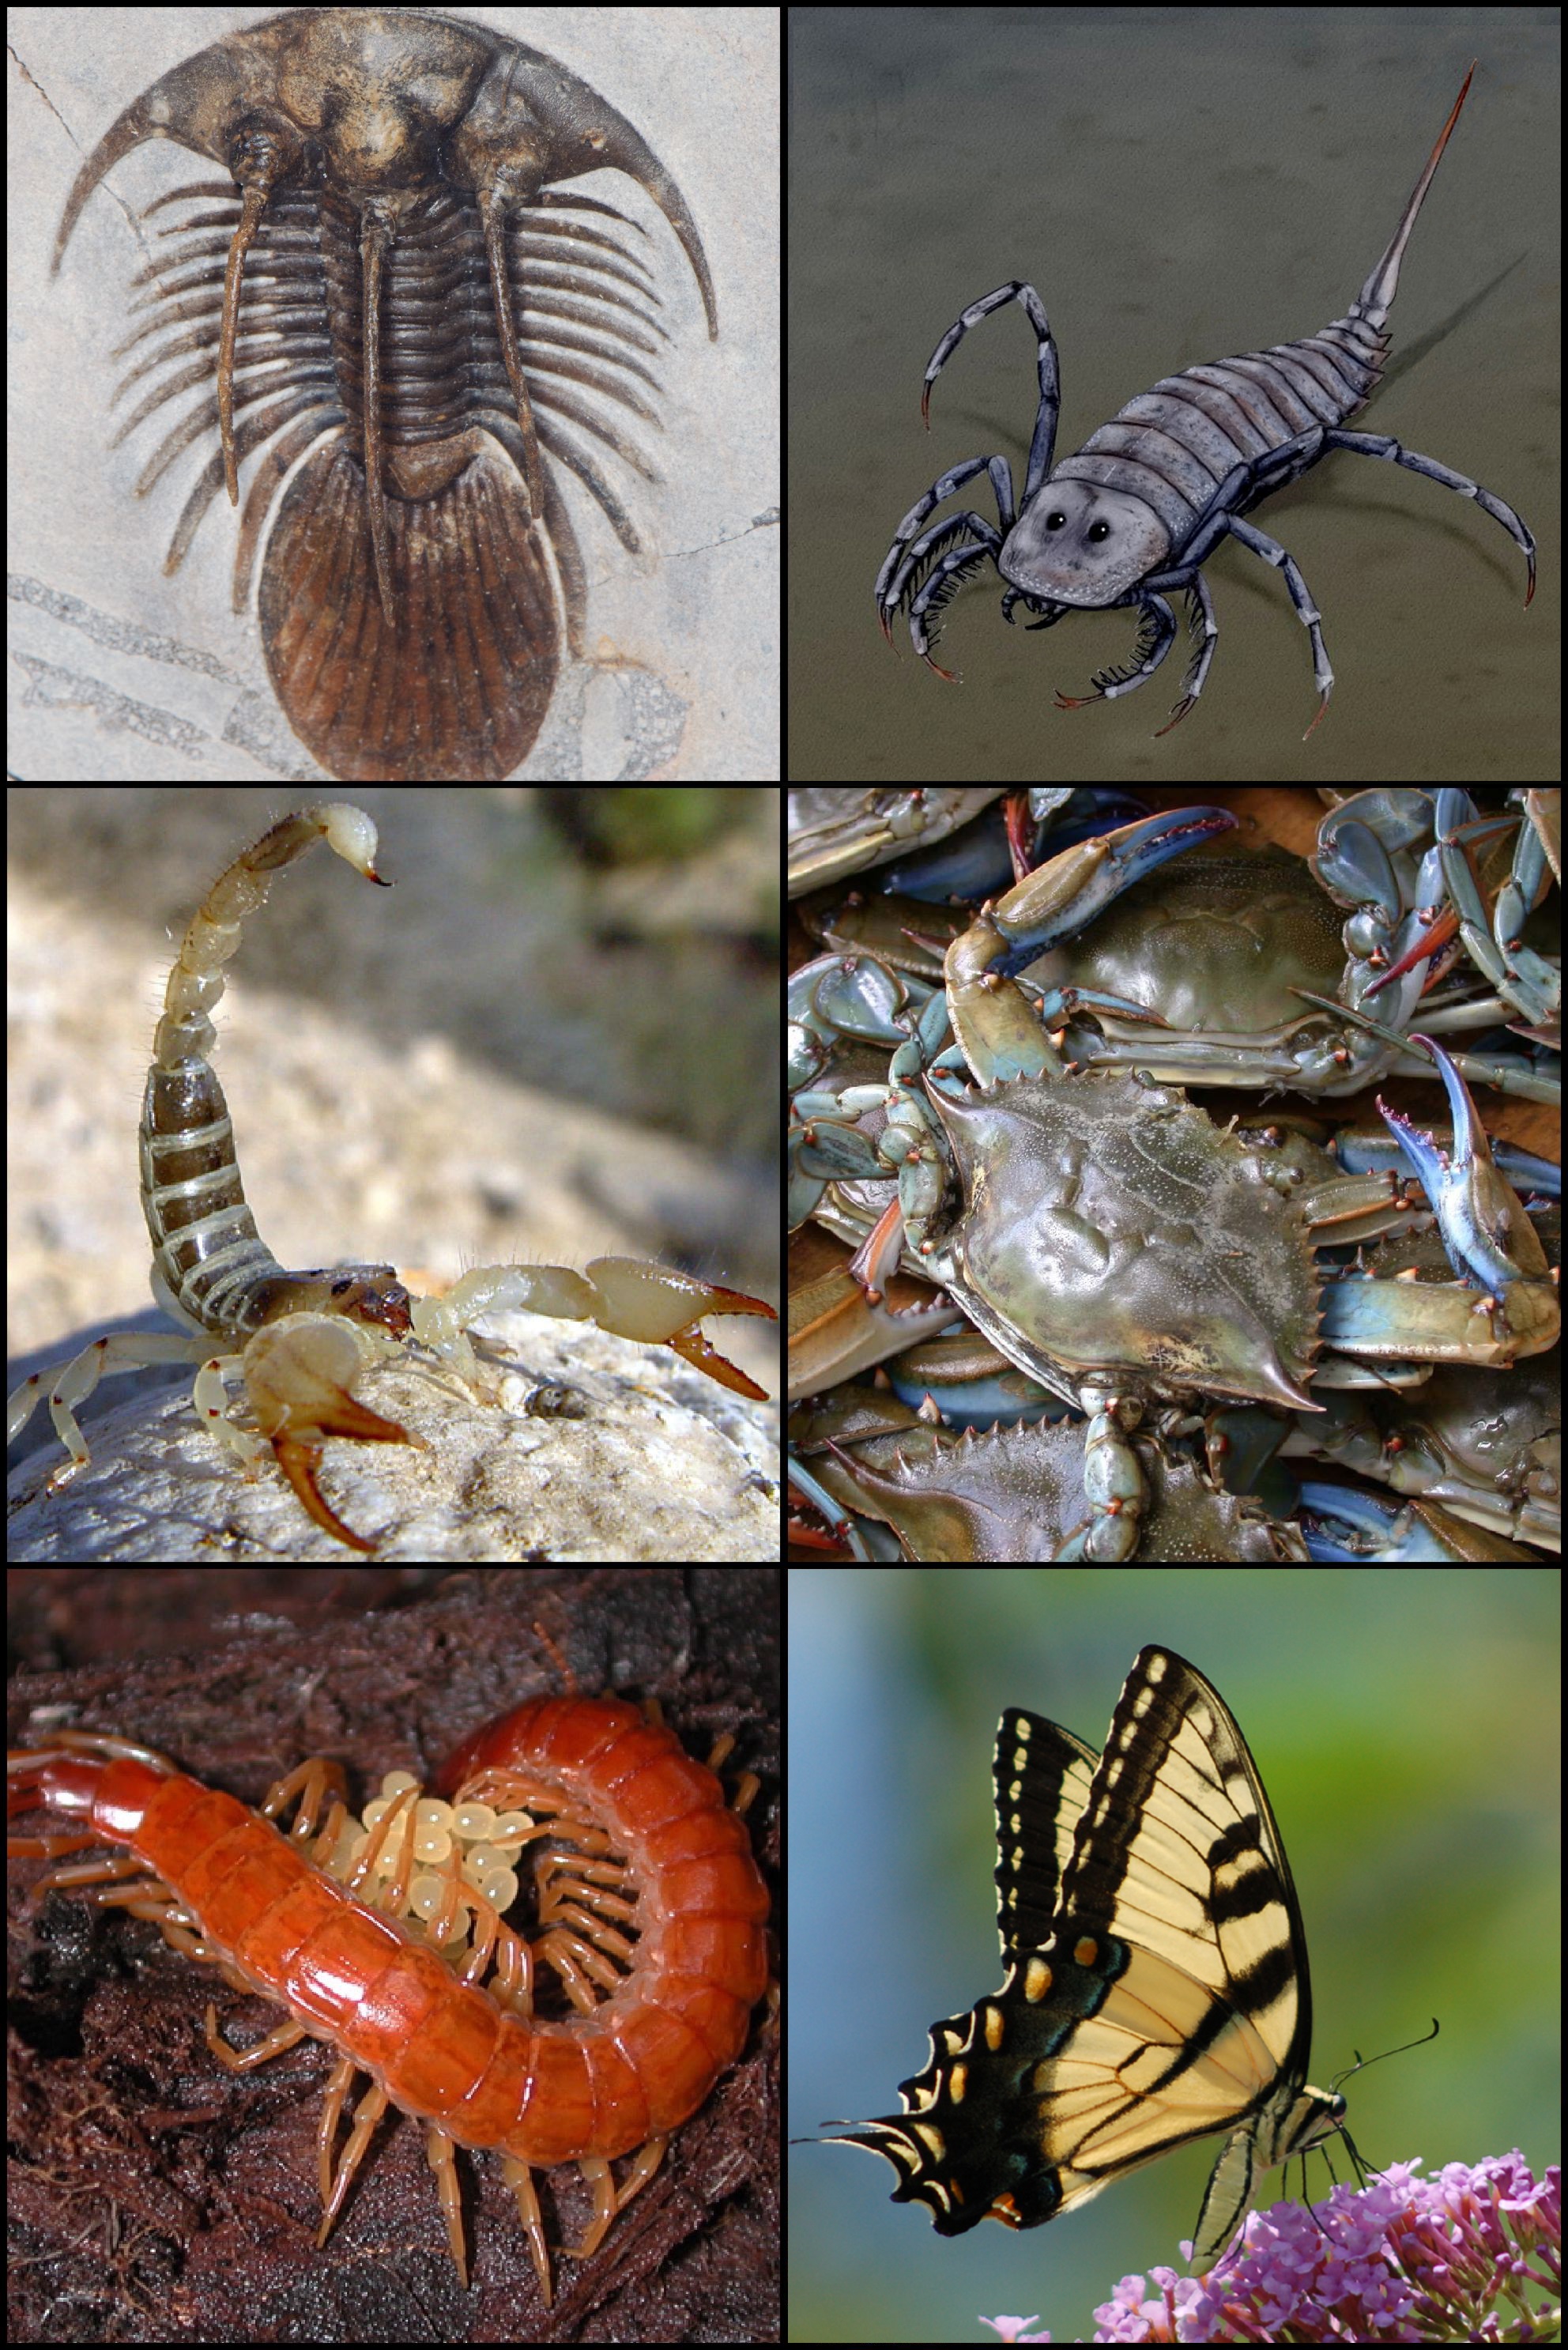 Diversity of arthropods: From left to right and from top to bottom: Kolihapeltis, Stylonurus, scorpion, crab, centipede, butterfly.